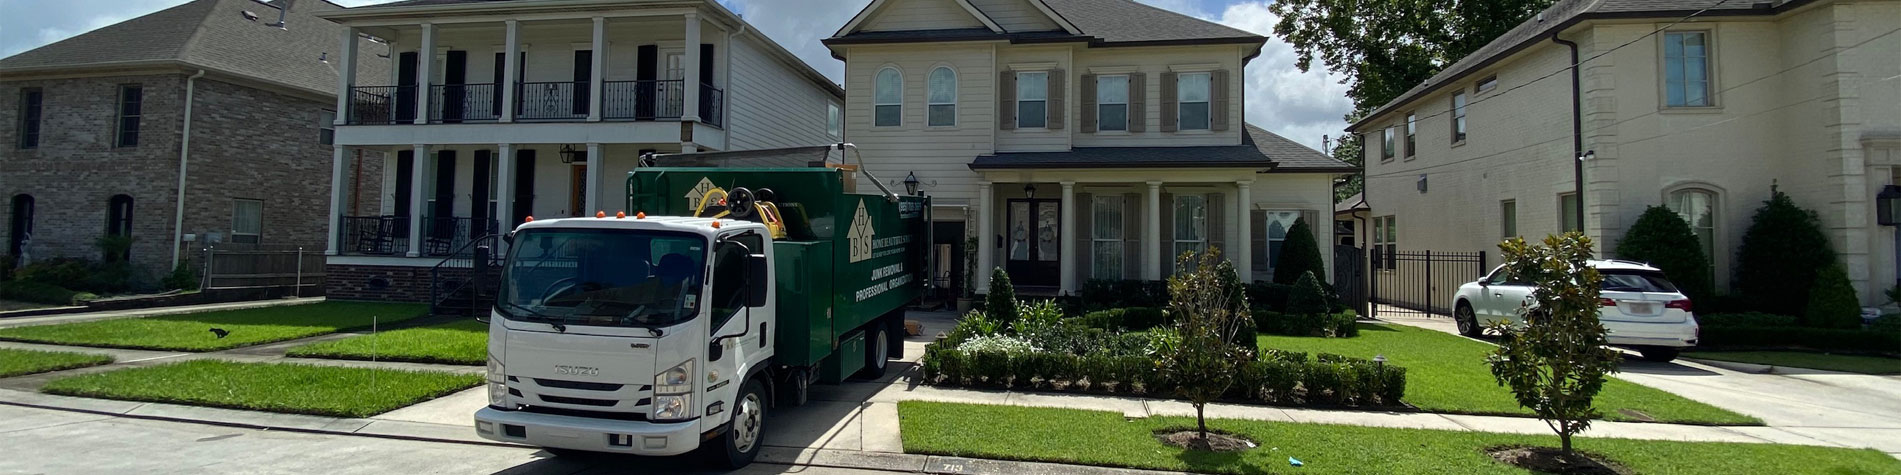 Junk Removal Truck in a Hammond Neighborhood Completing Junk Removal Work